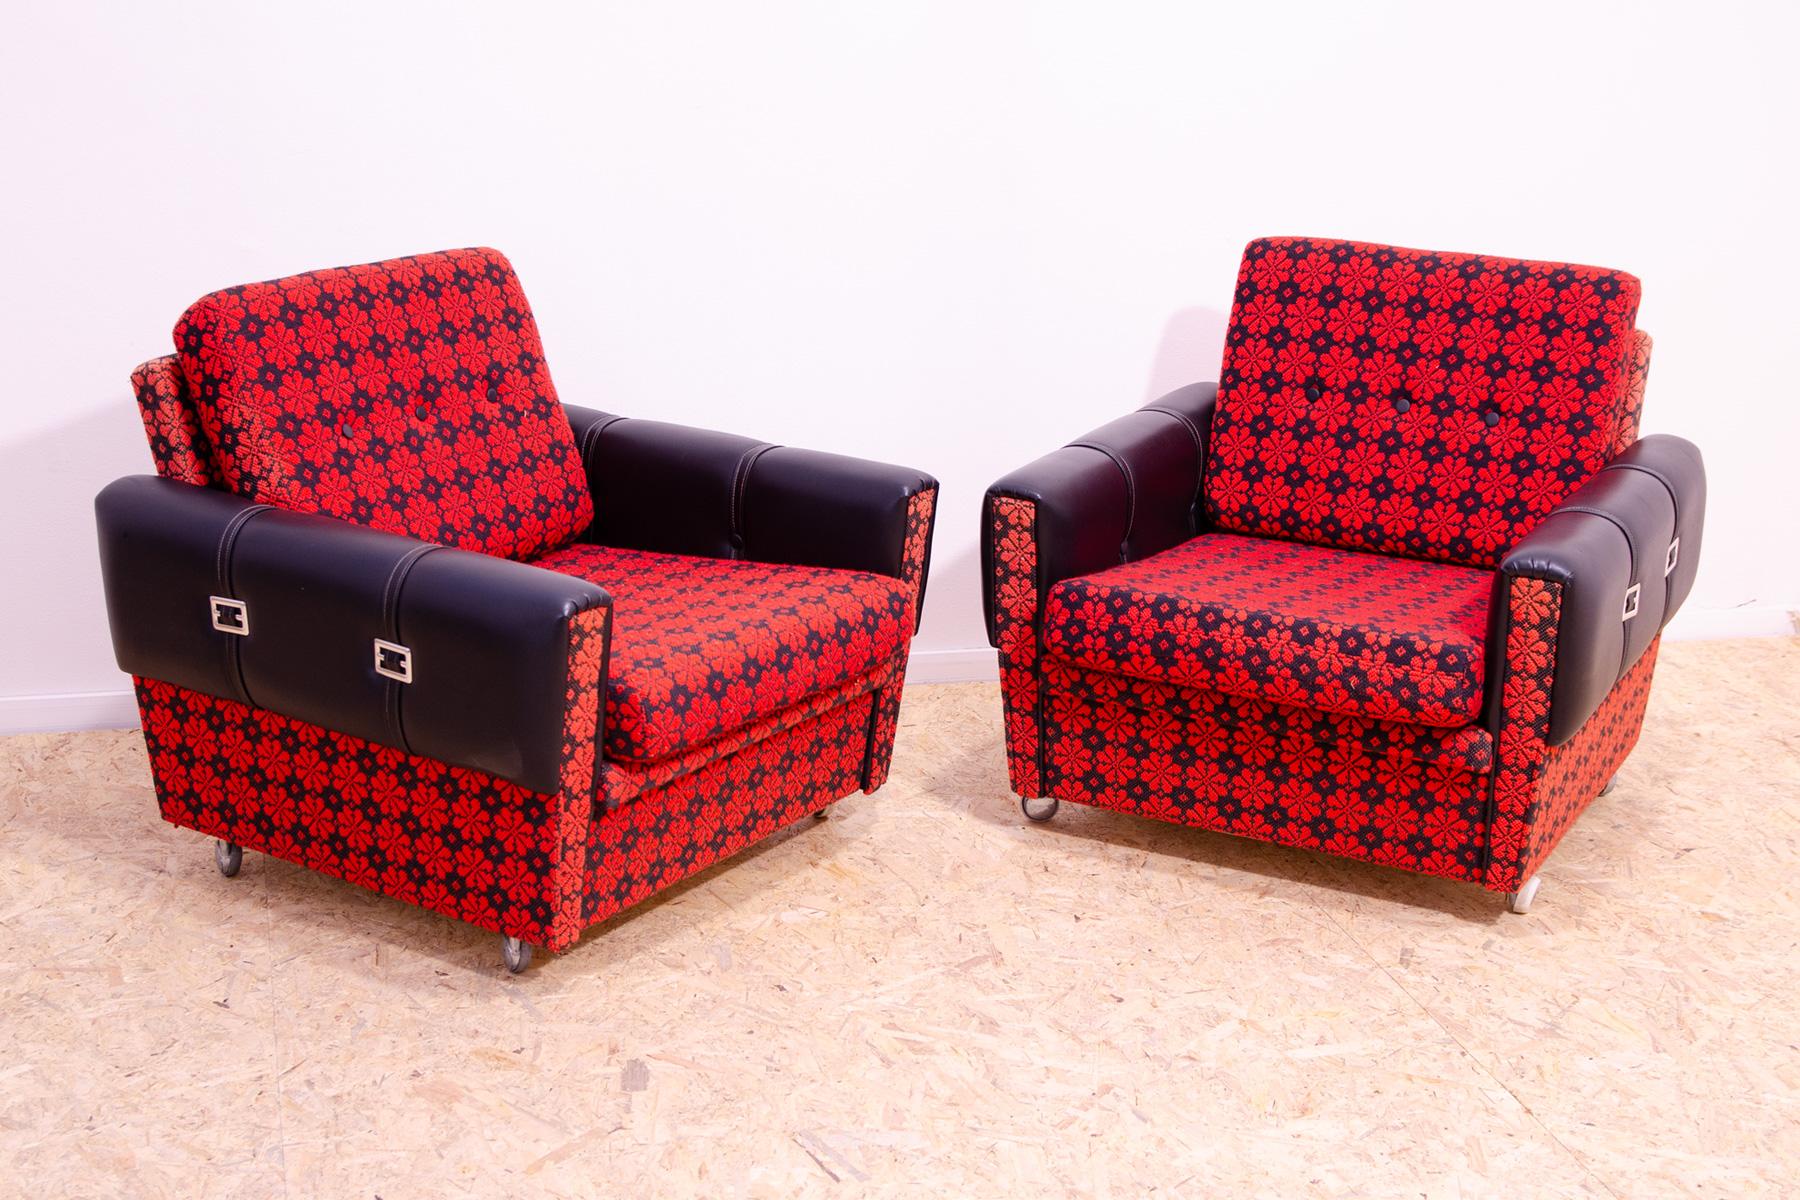 These armchairs were made in the former Czechoslovakia in the 1970s.
The furniture is upholstered in leatherette and fabric.

They are in good vintage condition with no damage, showing slight signs of age and use.
Price is for the pair.

